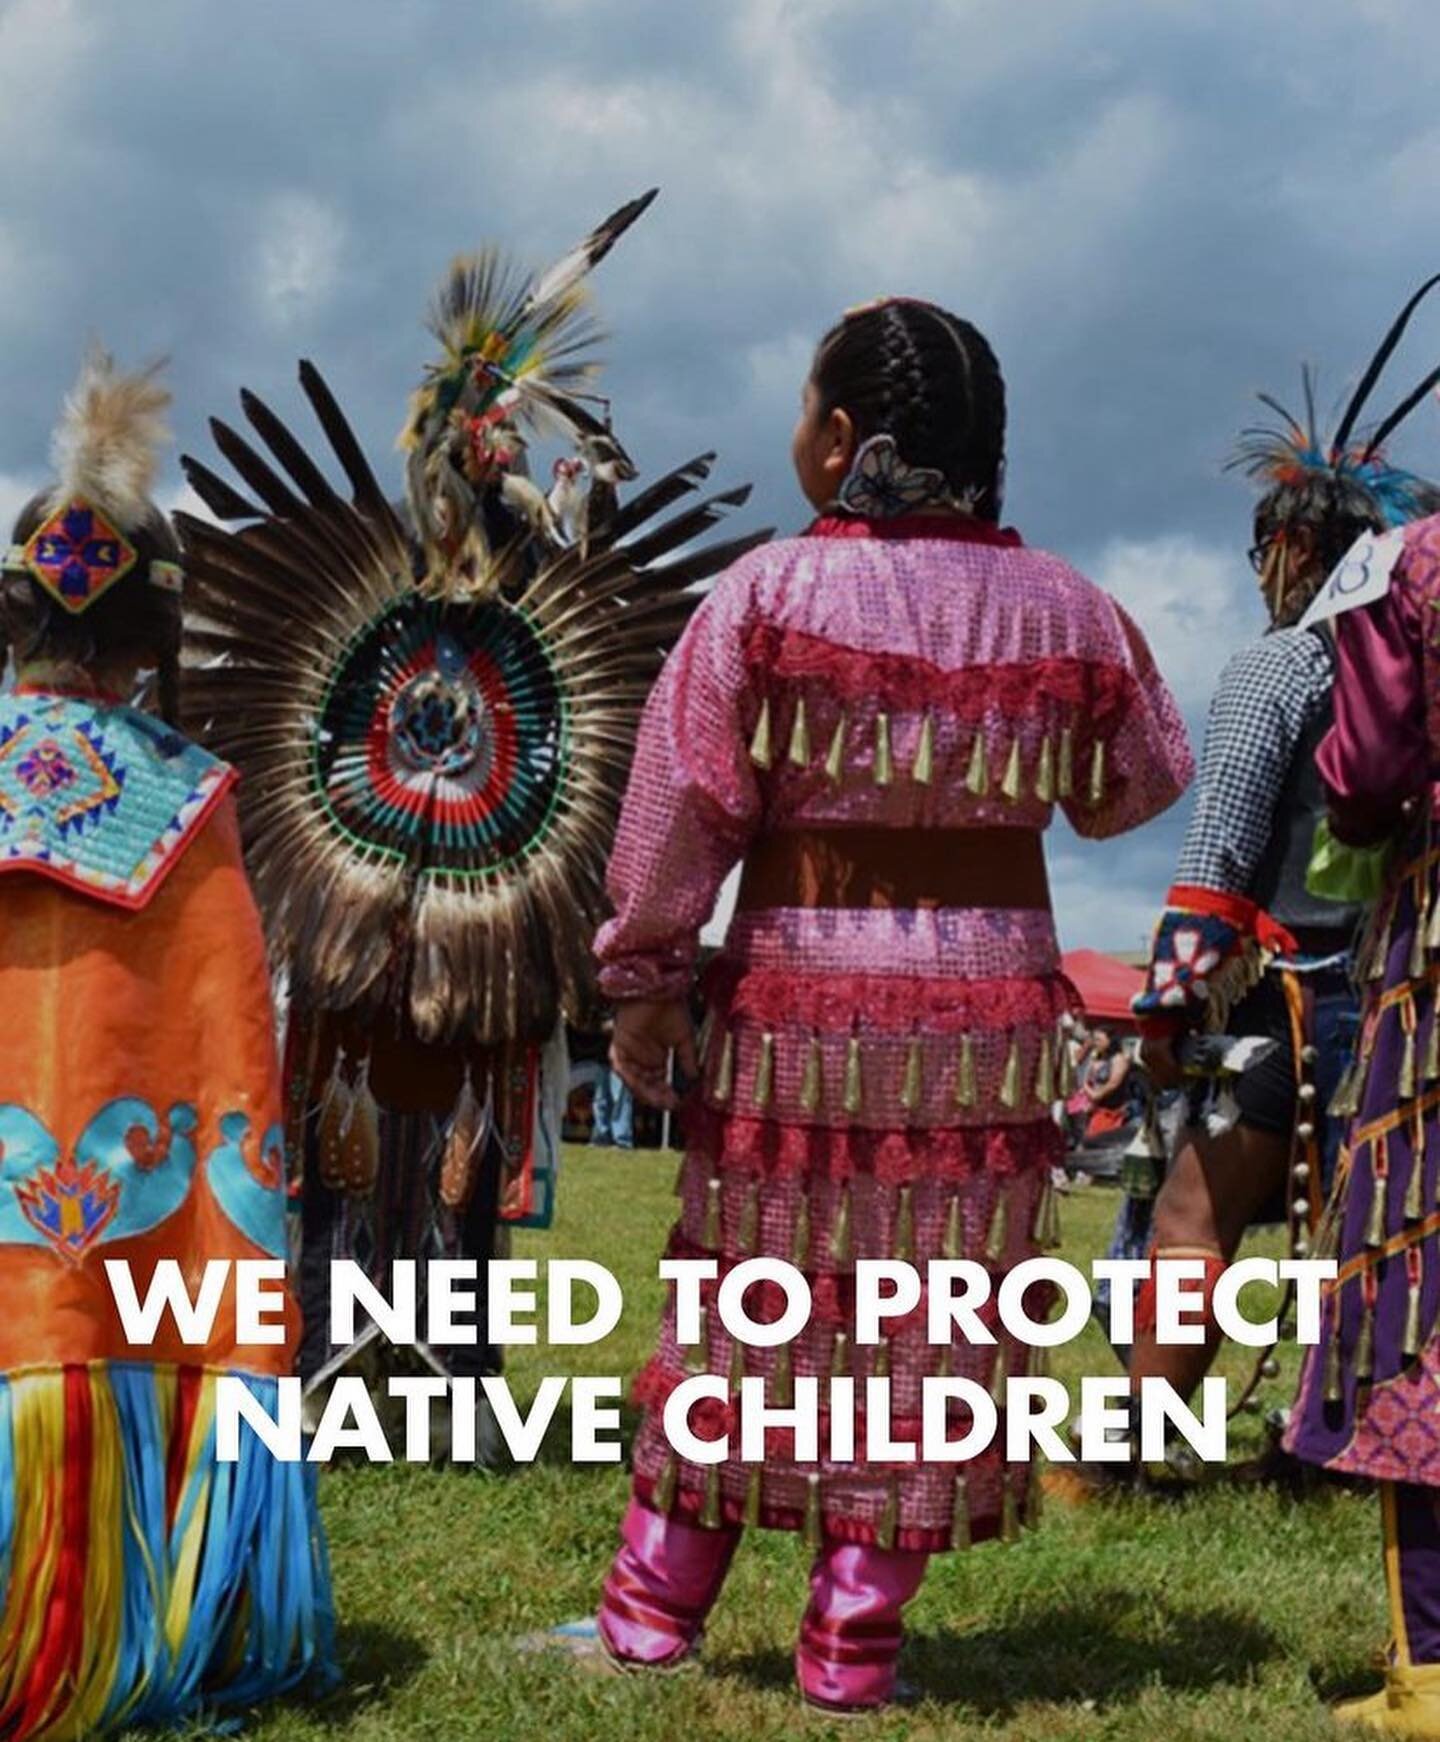 It&rsquo;s a critical day for Native kids and families, as the Supreme Court hears arguments on Haaland v. Brackeen, a decision that could overturn the Indian Child Welfare Act (ICWA) today, according to @protecticwa.

Advocates warn that if this 45-